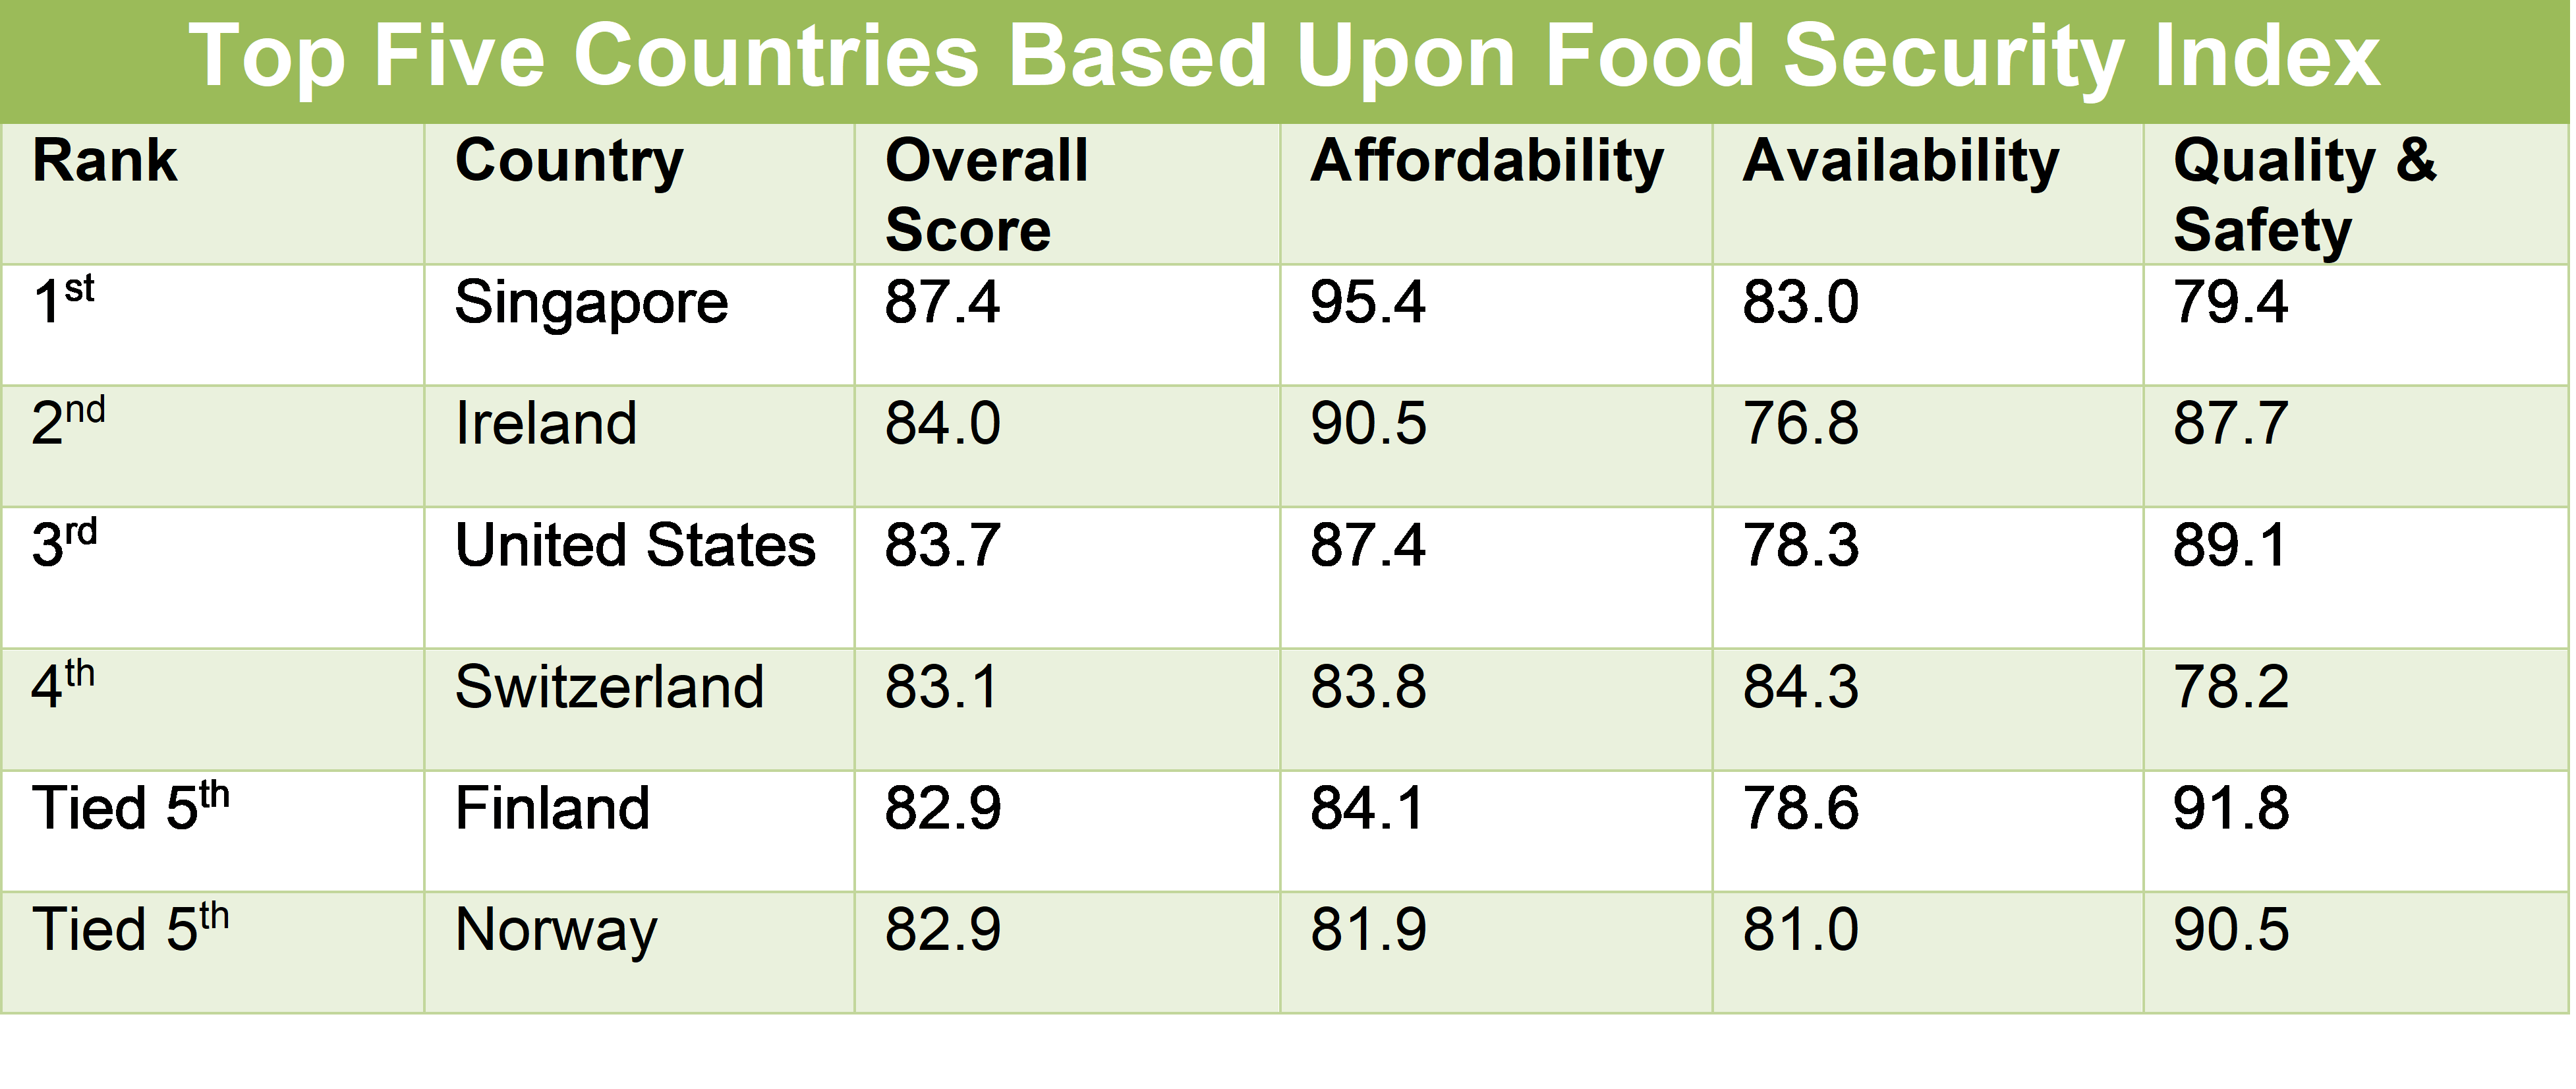 Top Five Countries Based Upon the Food Security Index